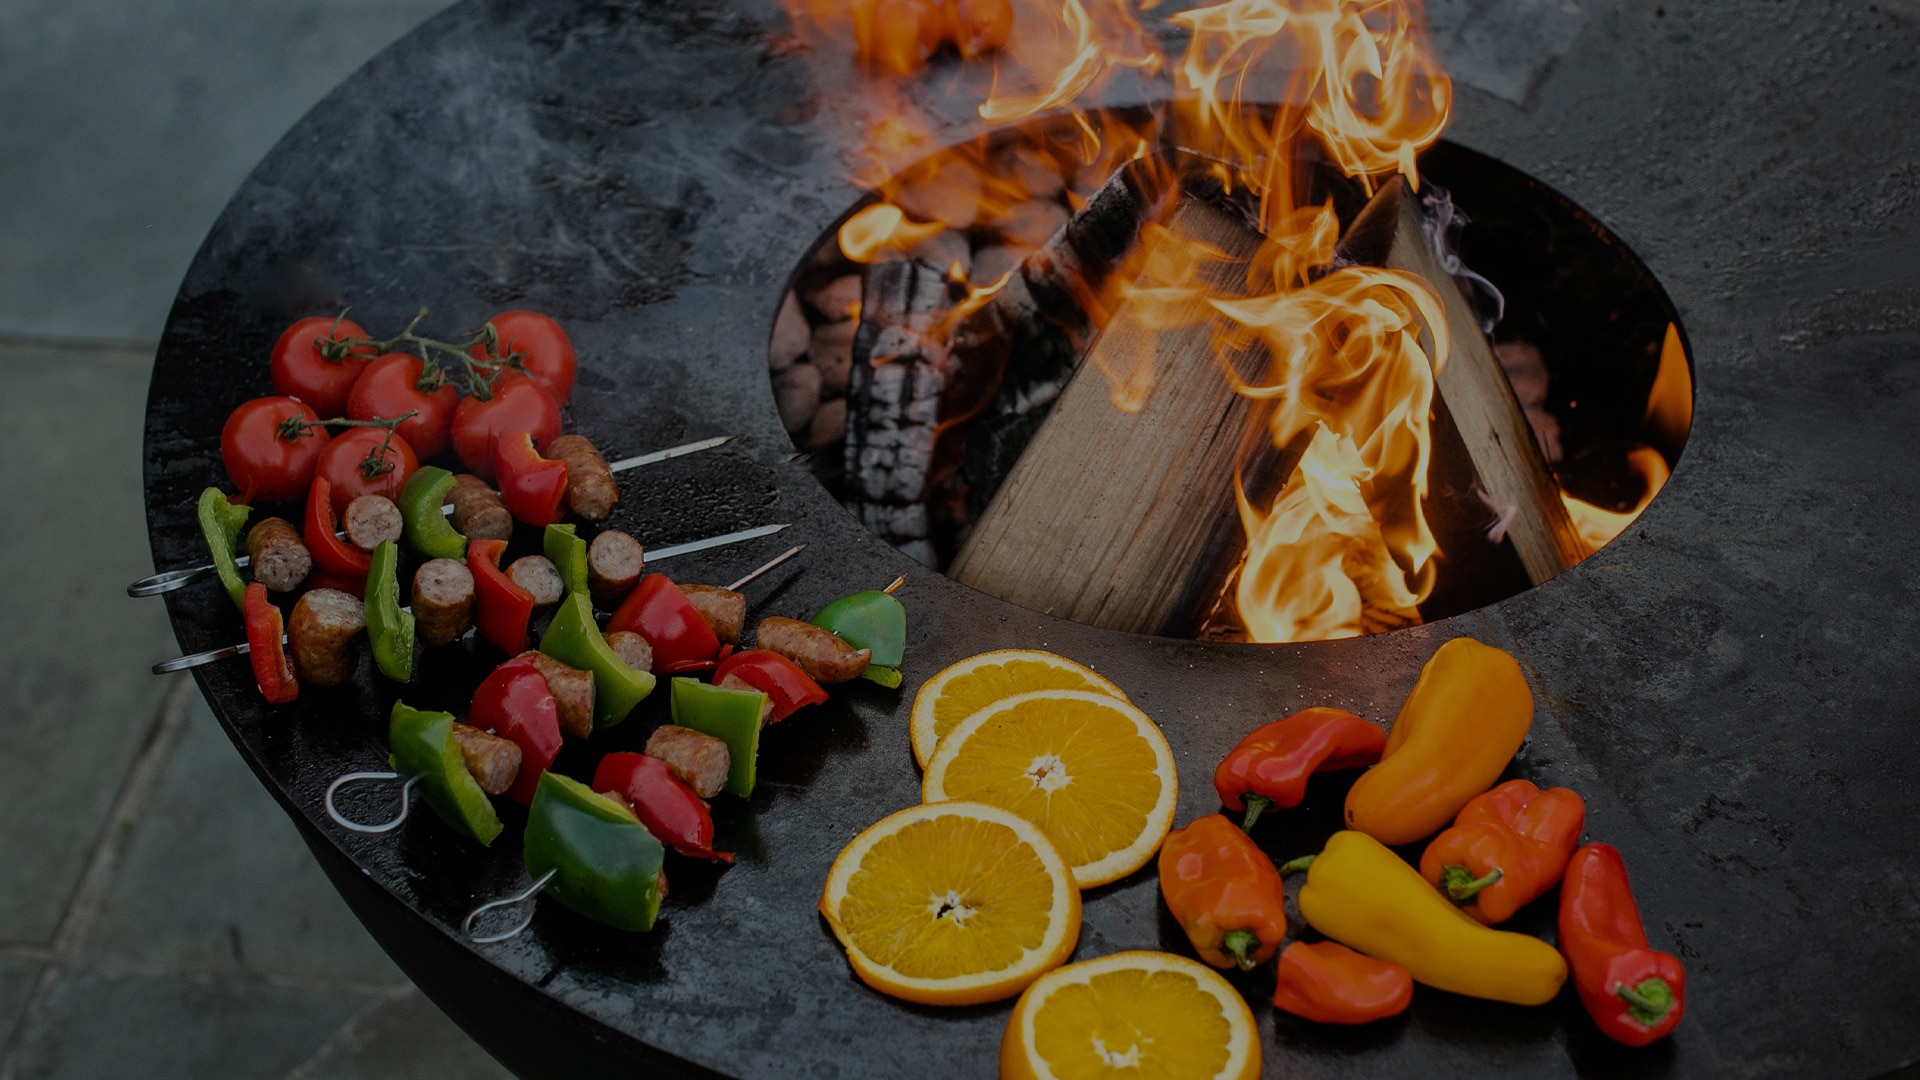 Fire Pit Grilling: Bringing People Together With Fire And Food